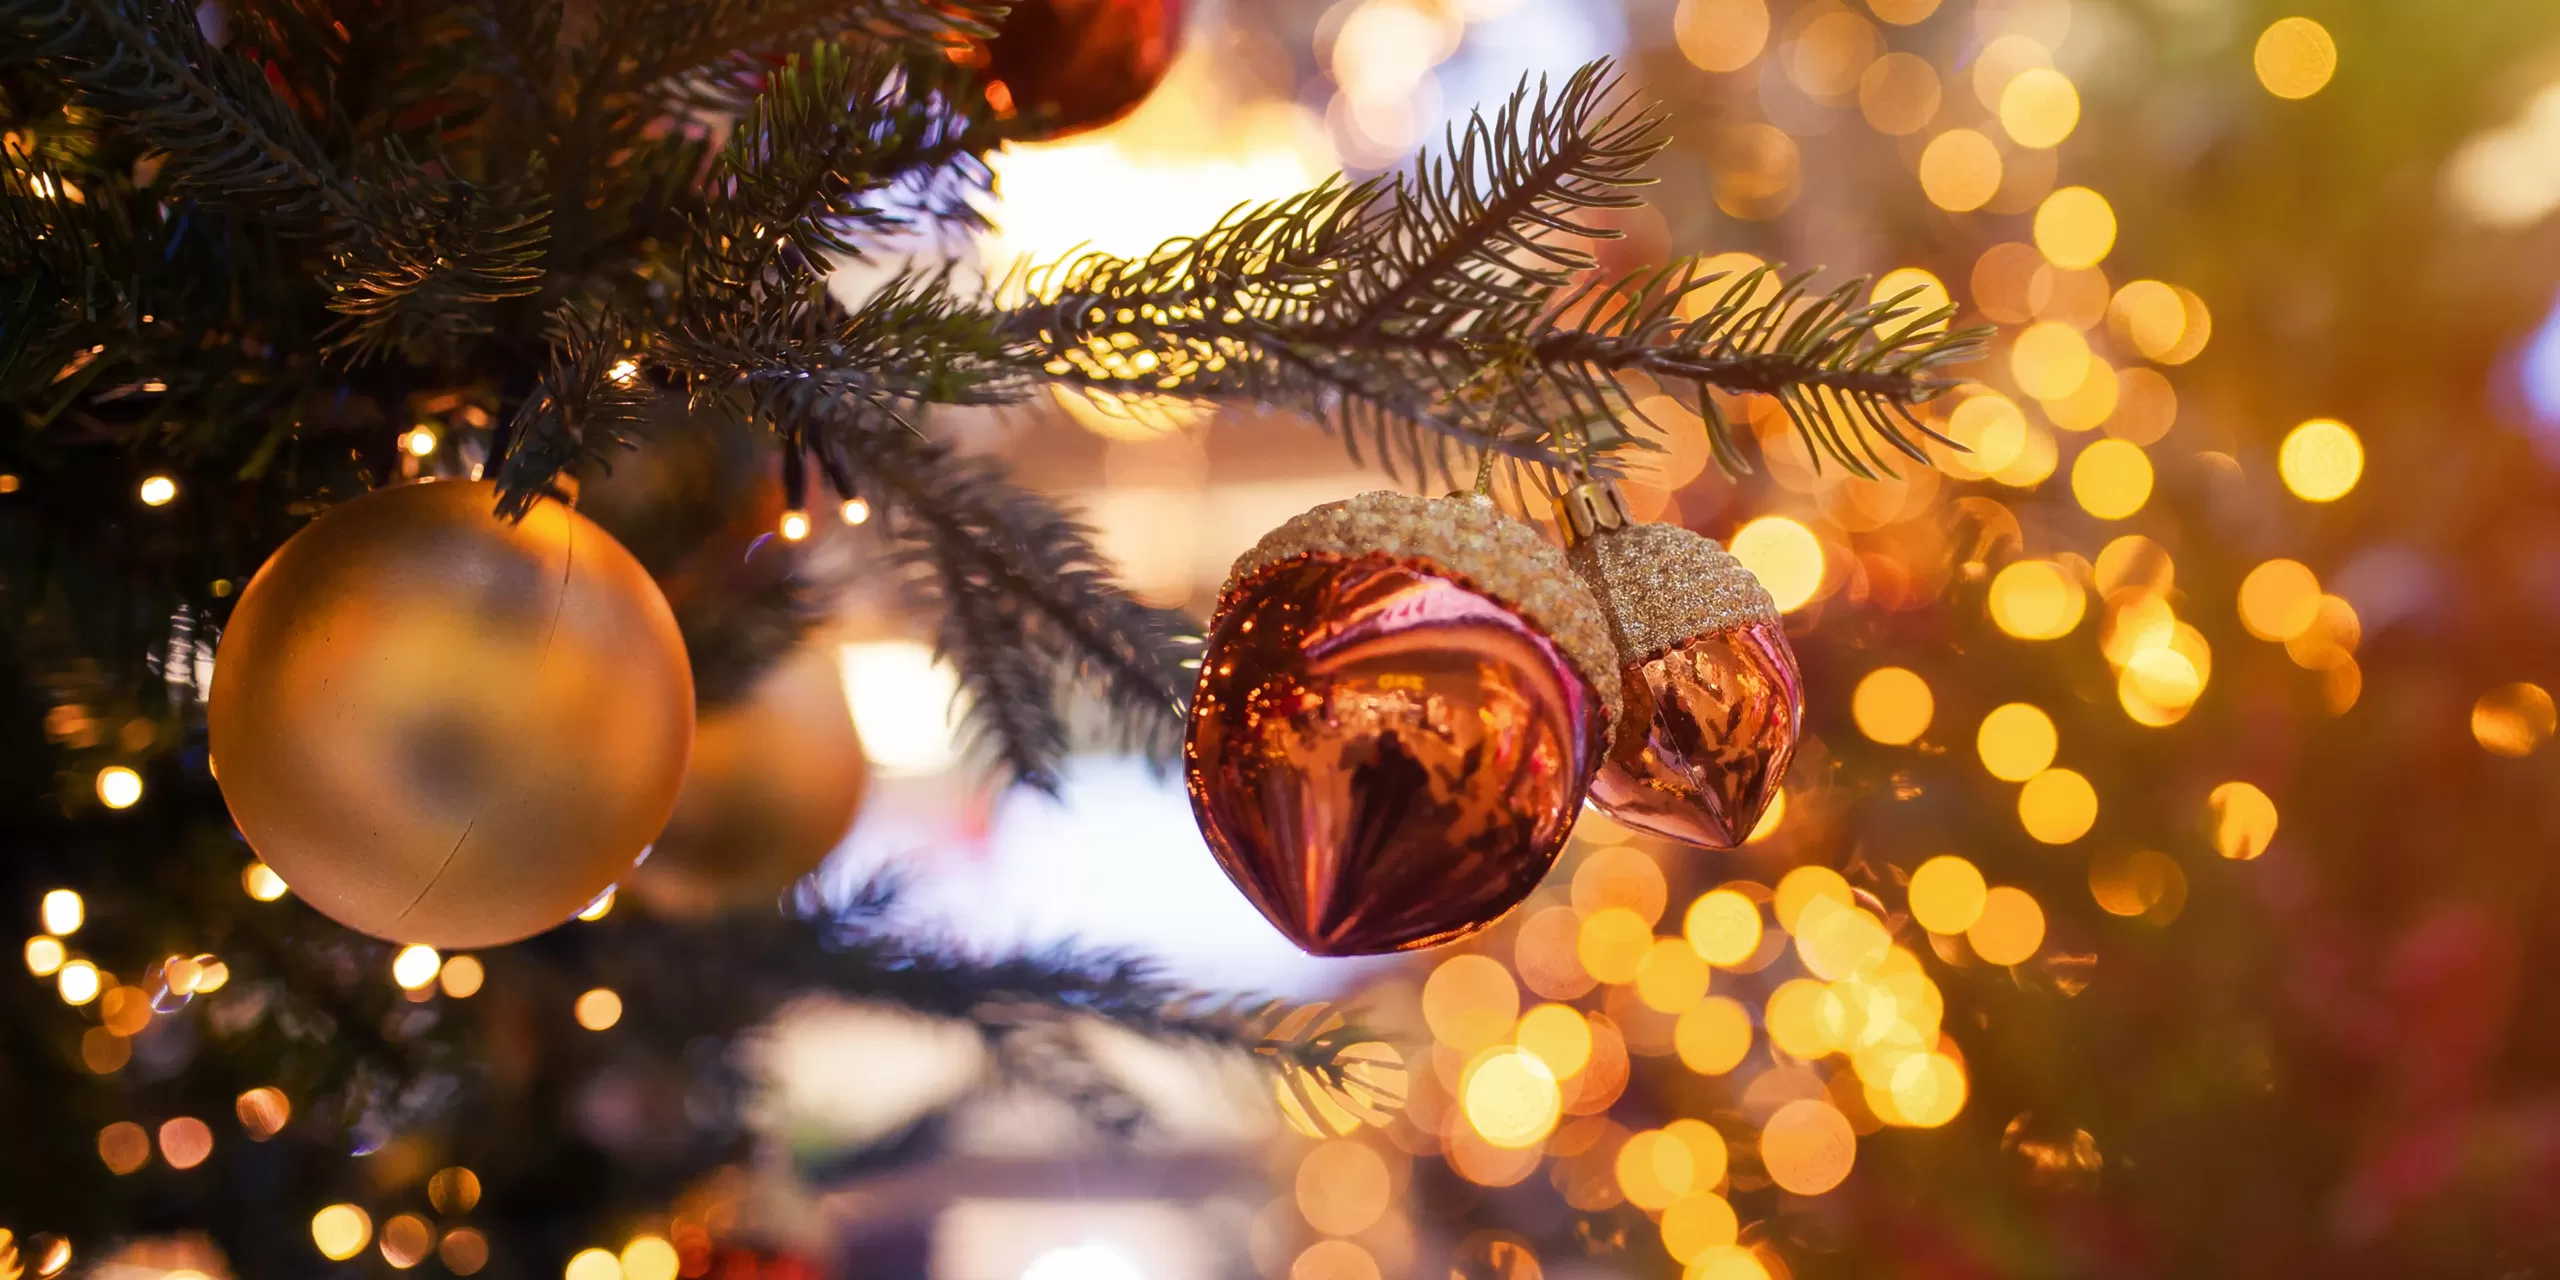 For some people, Christmas may be a mixed bag of emotions. Christmas is a joyful time of year, but it can also bring Christmas stress and encourage actions that aren't necessarily great for your mental wellbeing.